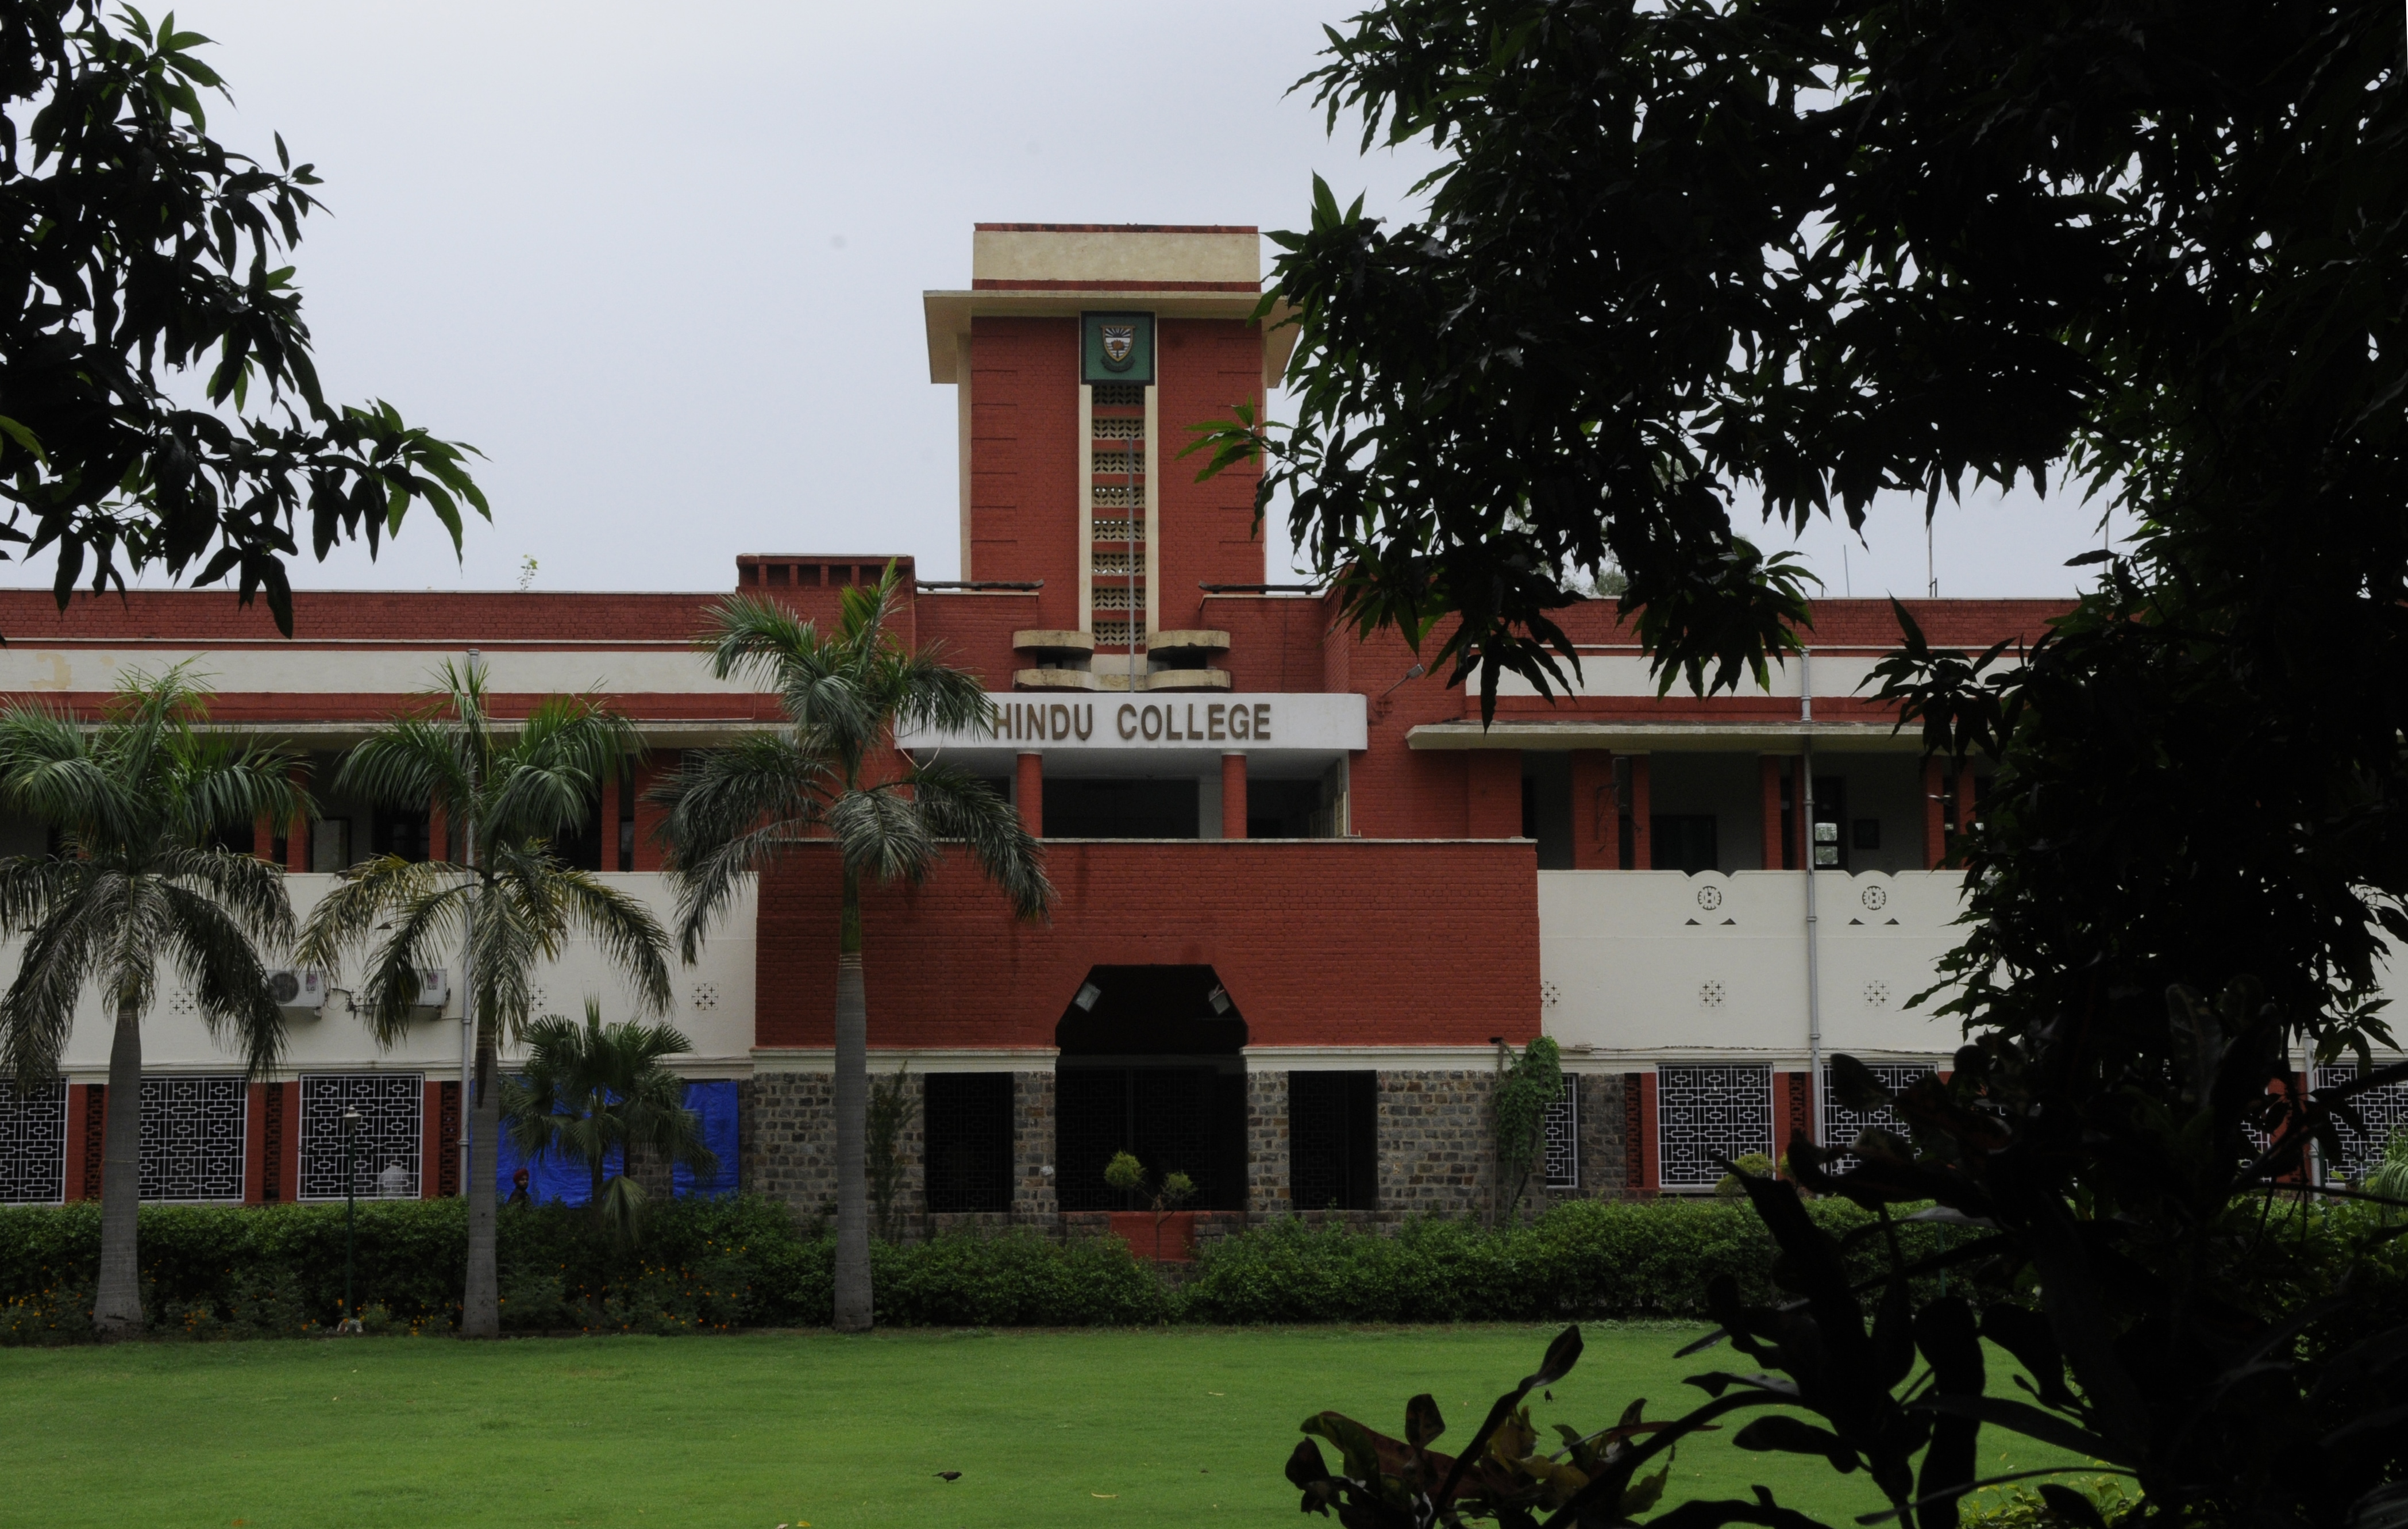 Hindu College is the alma mater of many Bollywood personalities such as filmmaker Imtiaz Ali. (Photo: Sonu Mehta/HT)